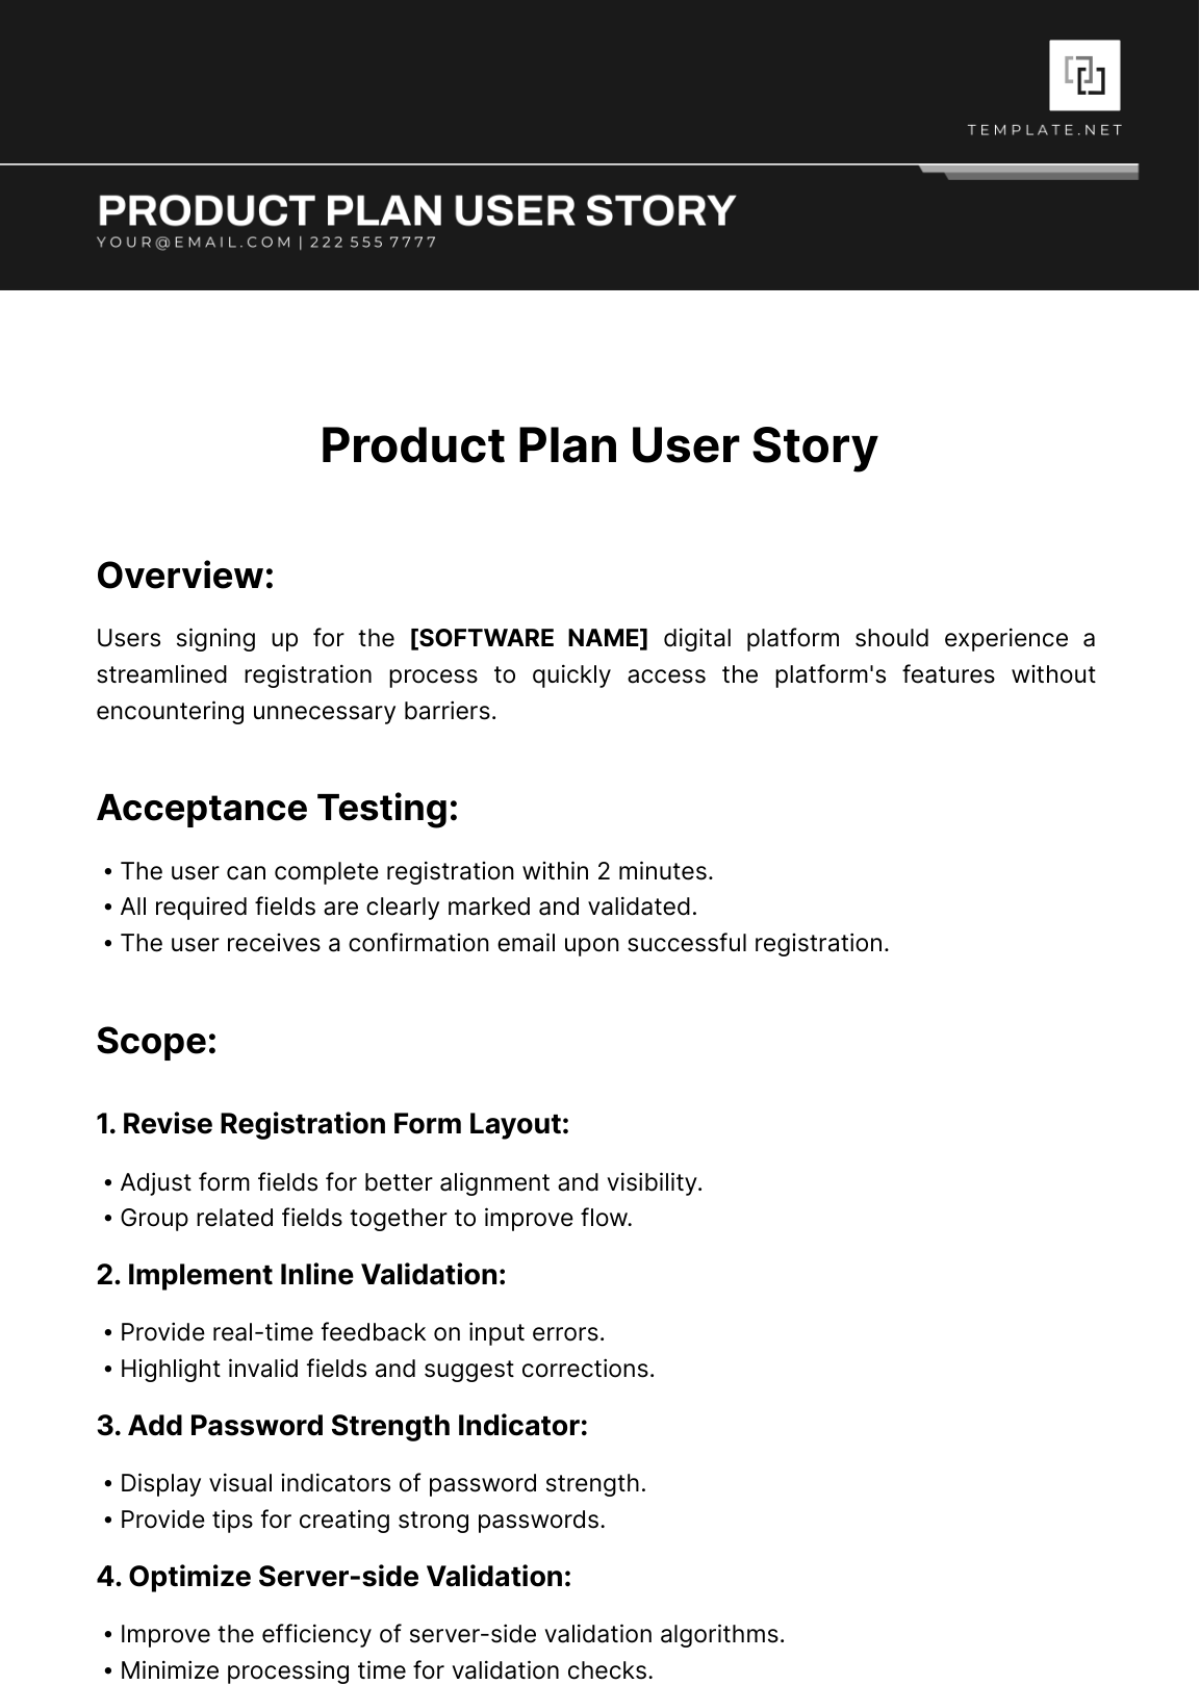 Free Product Plan User Story Template